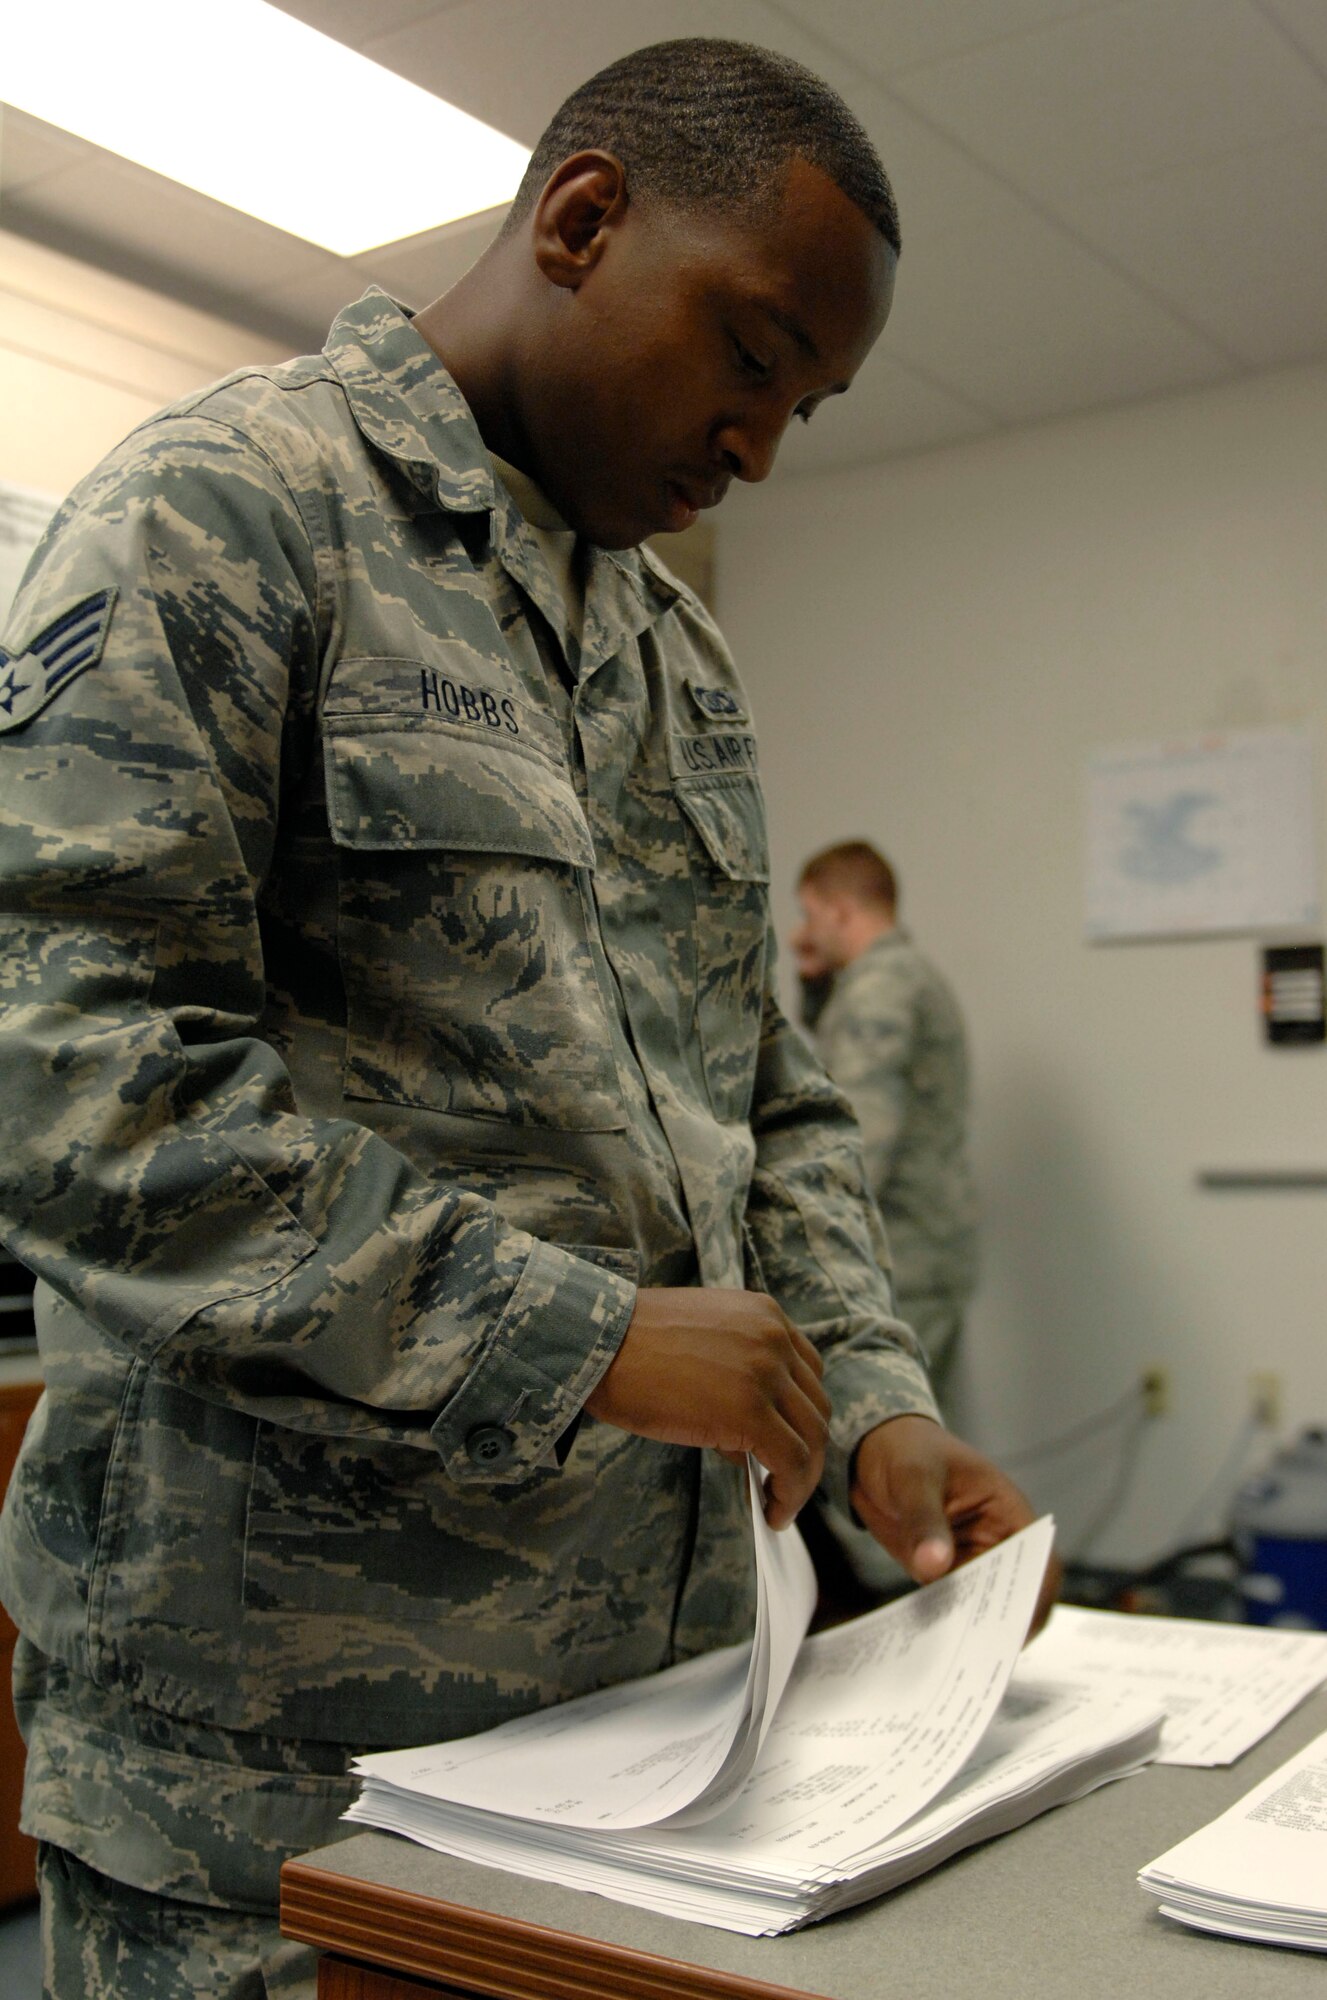 U.S. Air Force Senior Airman Tyrone Hobbs, 355th Operations Support Squadron flight records, separates paperwork to be placed in squadron members' Annual Products at Davis-Monthan Air Force Base, Ariz., June 4, 2013. An Annual Product is a collection of records, such as flying hours, that is compiled by flight records and reviewed by squadron members once a year. (U.S. Air Force photo by Airman 1st Class Saphfire Cook/Released)